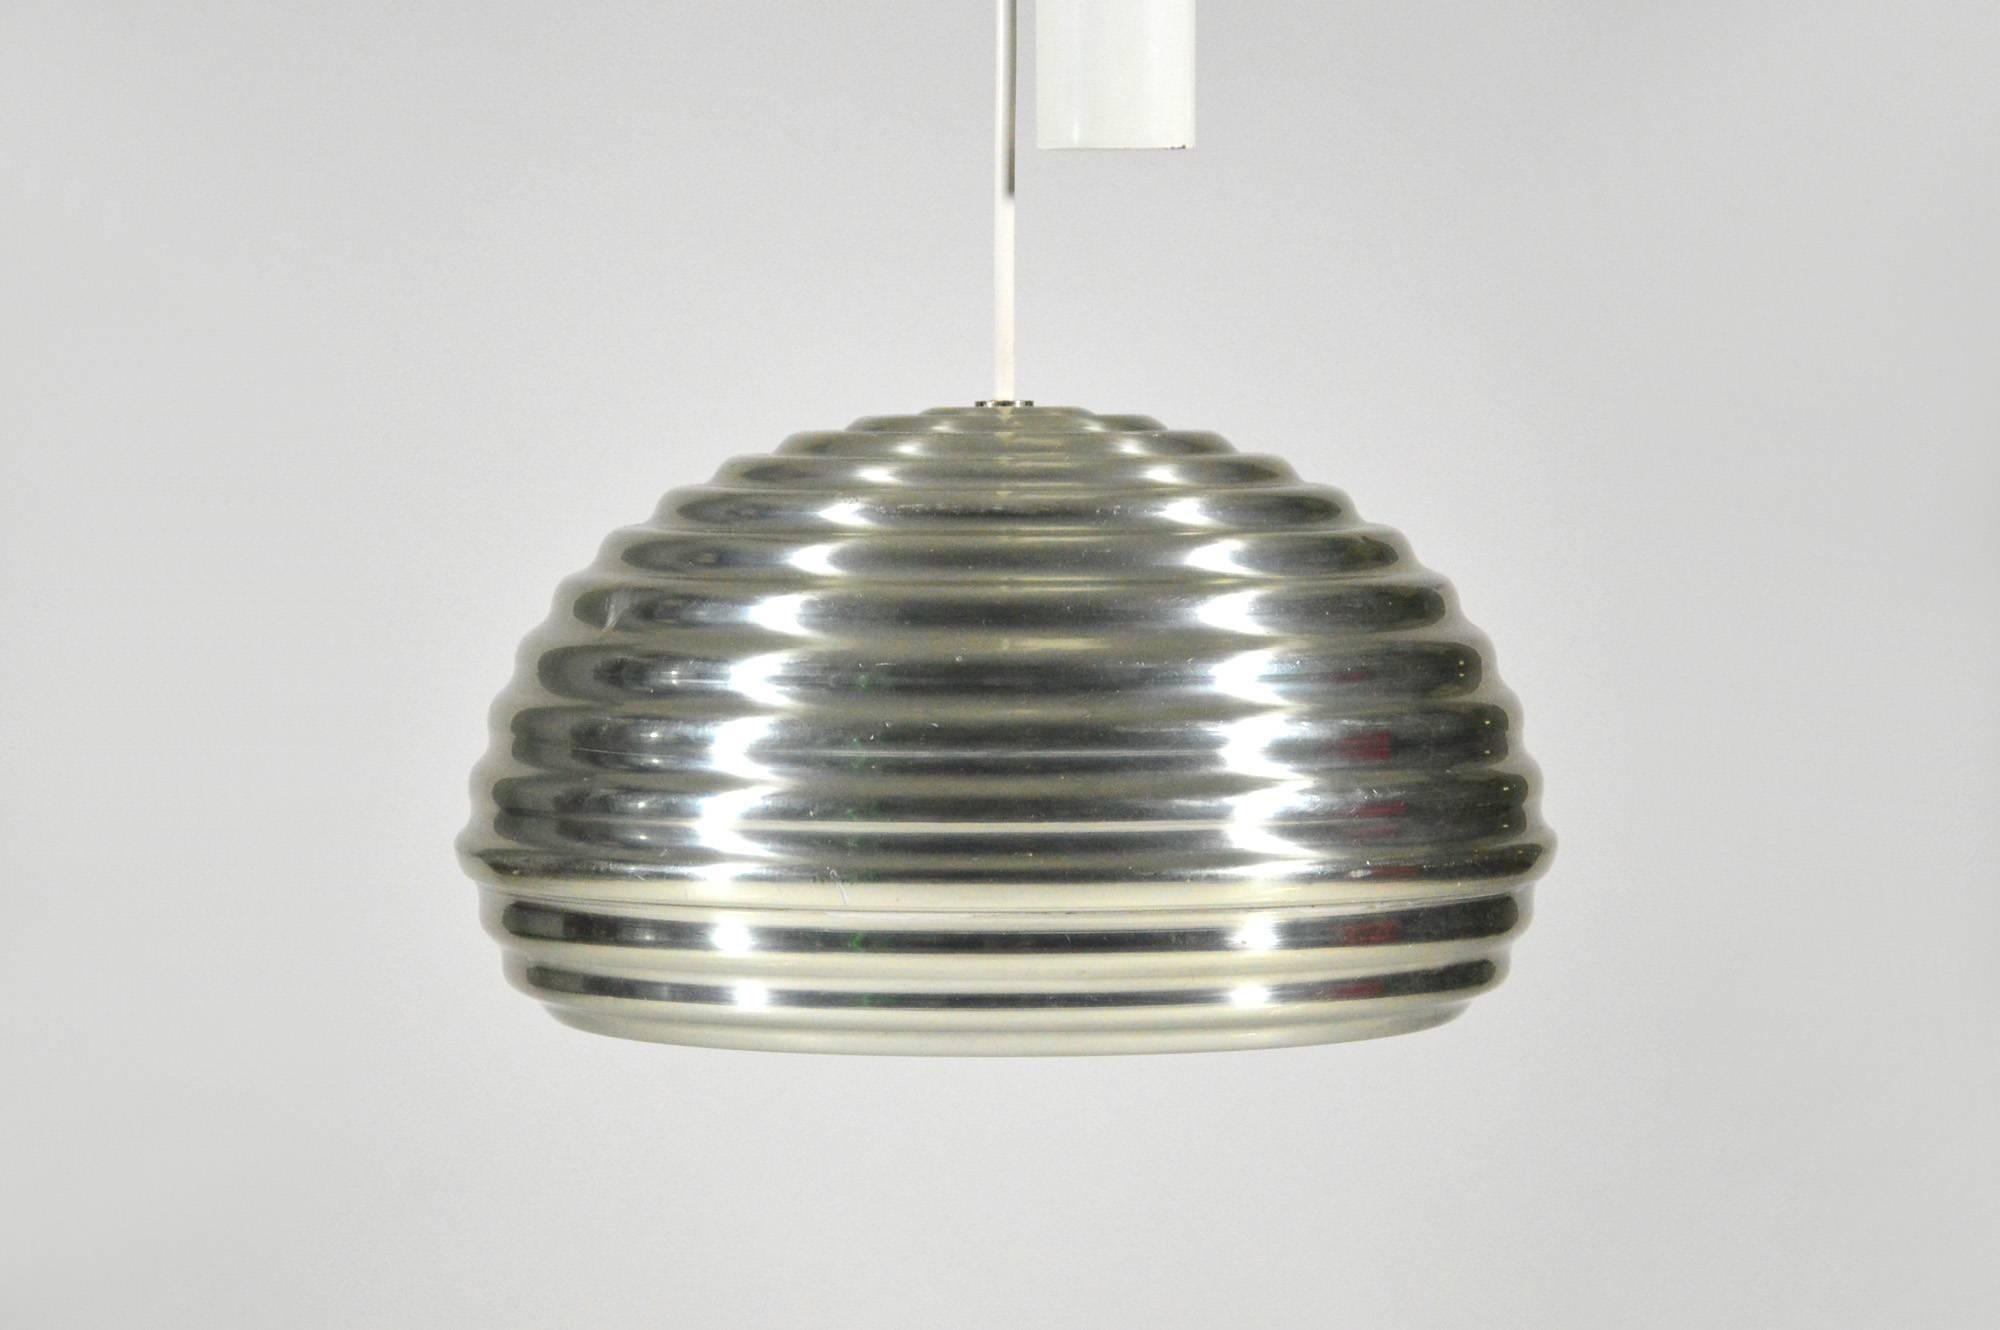 Rare version with up and down mechanism of the famous Splügen Bräu pendant lamp, designed by Achille and Piergiacomo Castiglioni in 1961 for a brasserie in Milan, and produced by Flos.
This is an early version in good original condition with some